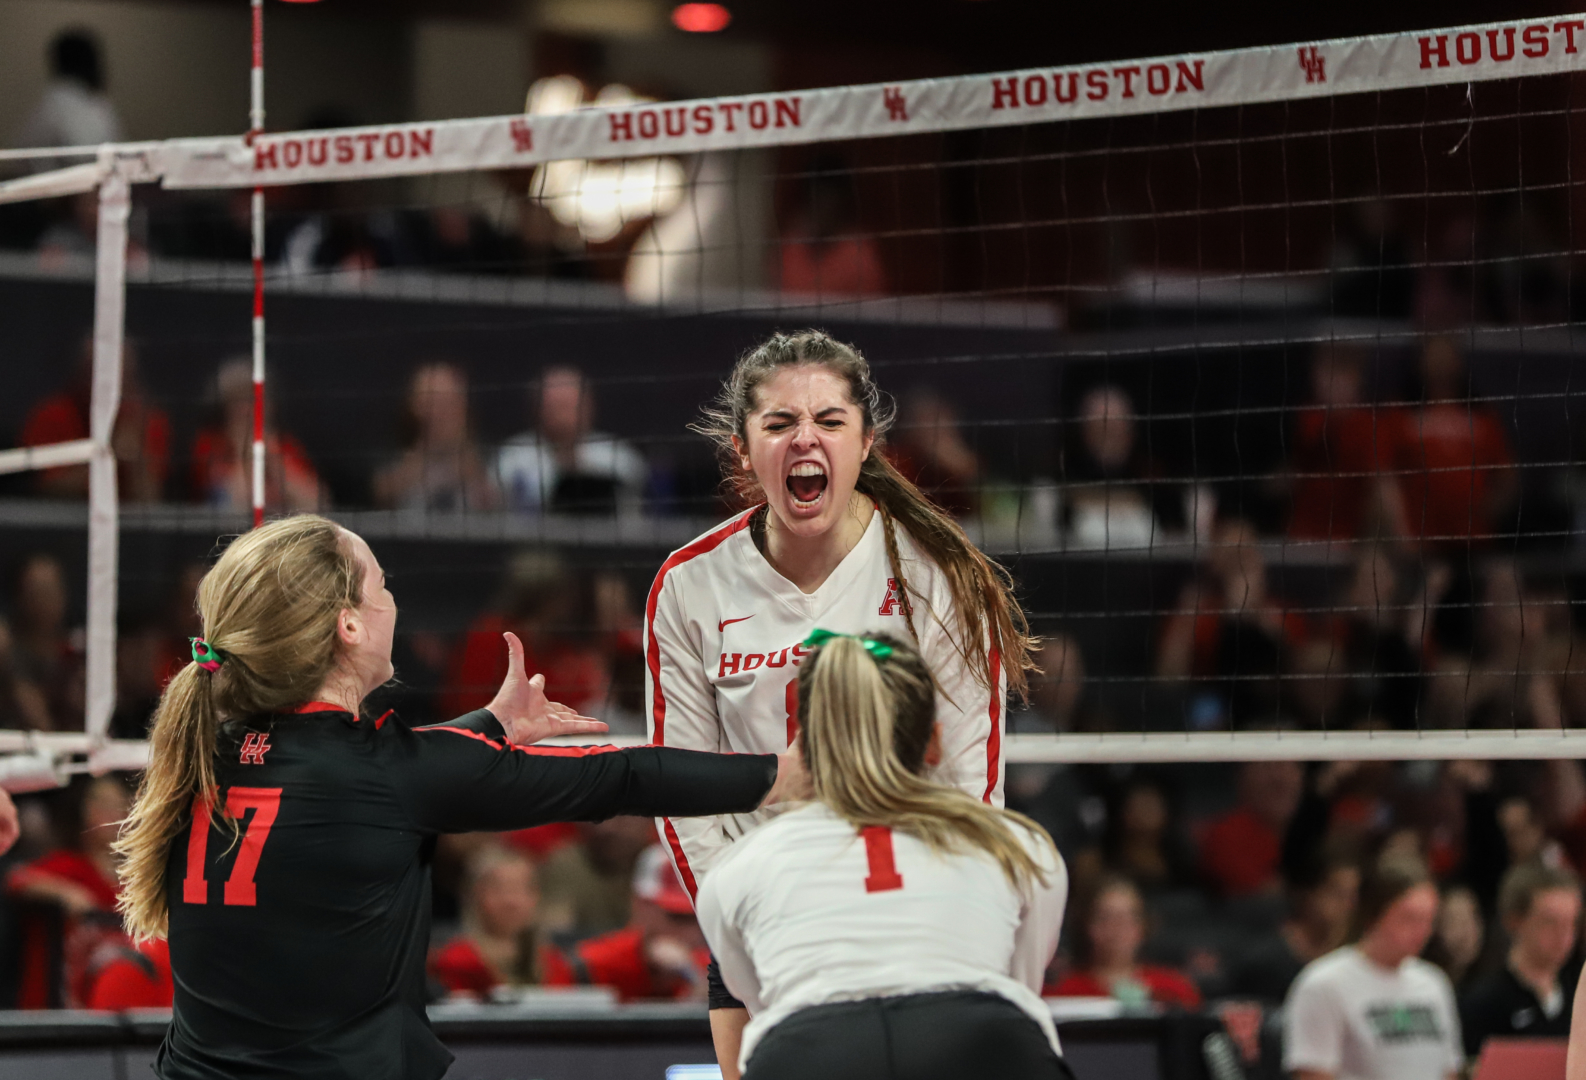 For the first time since 2003, UH volleyball beat a ranked opponent as the Cougars knocked off No. 23 UCF on Friday night at Fertitta Center. | Sean Thomas/The Cougar